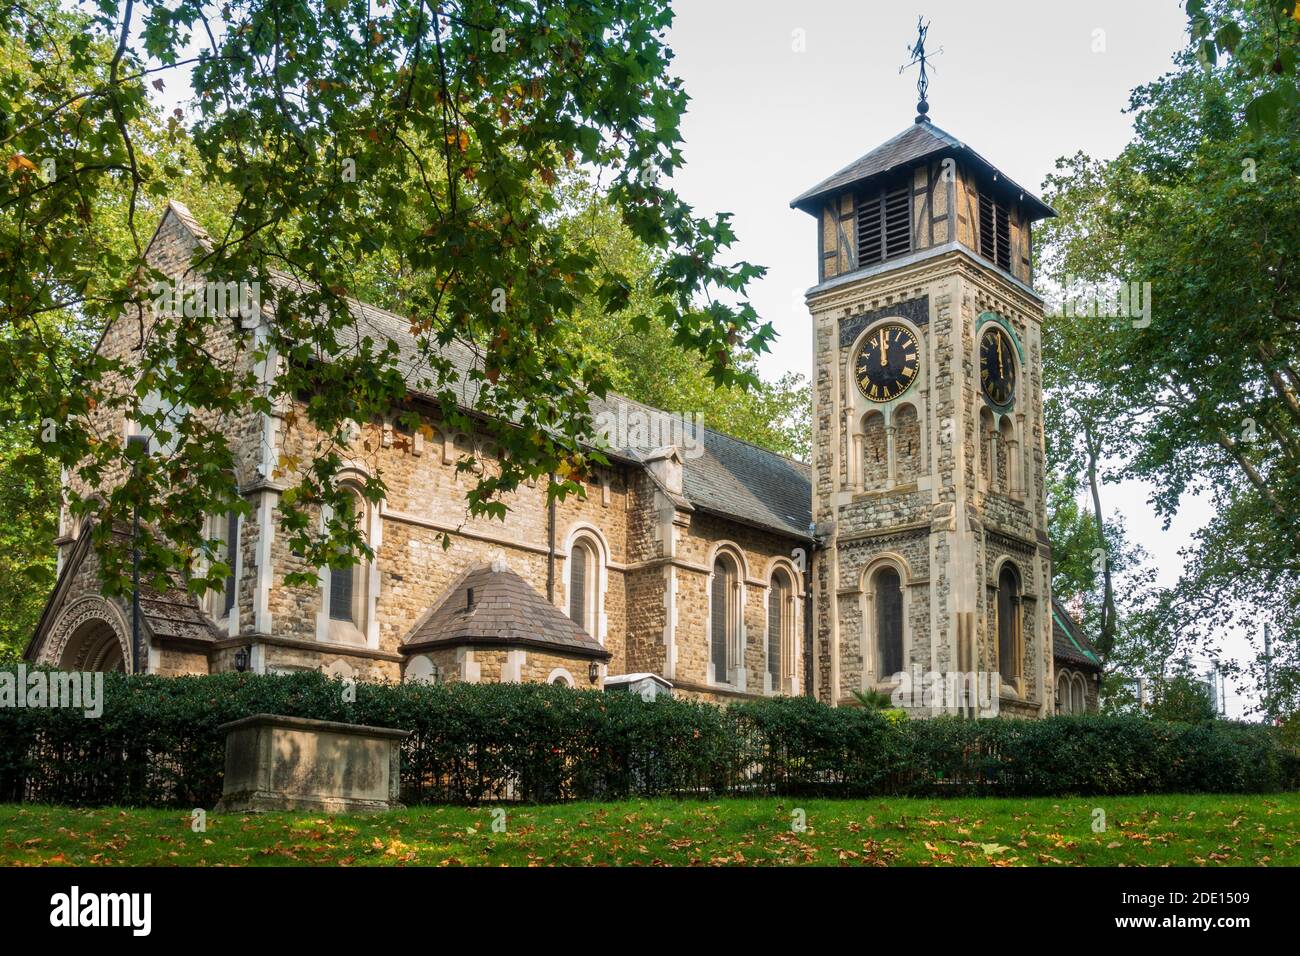 The medieval church and graveyard of Old St. Pancras, Kings Cross, London, England, United Kingdom, Europe Stock Photo